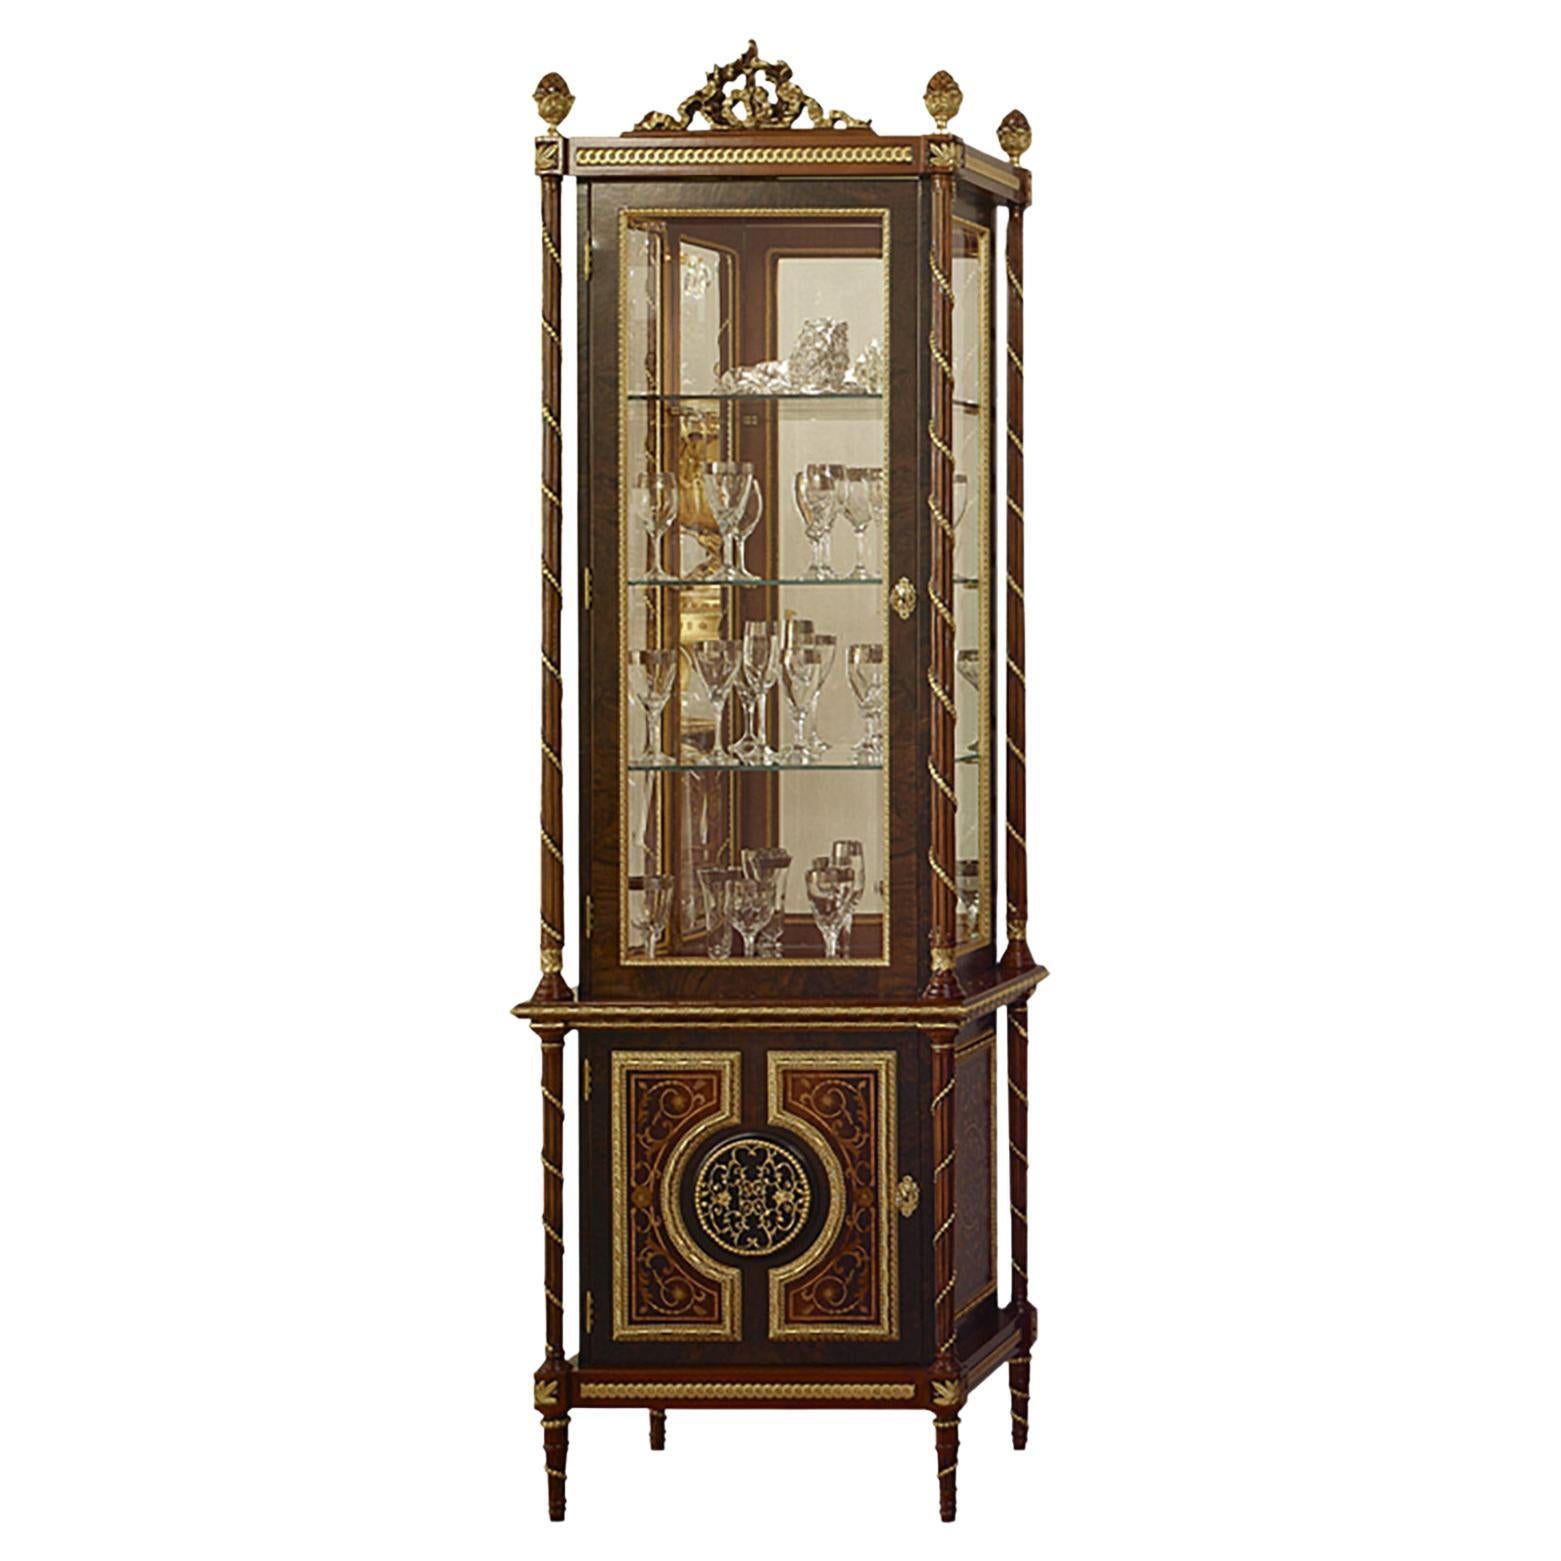 Empire-Style Vitrine with Inlays, Handmade Columns and Gold Leaf Decorations